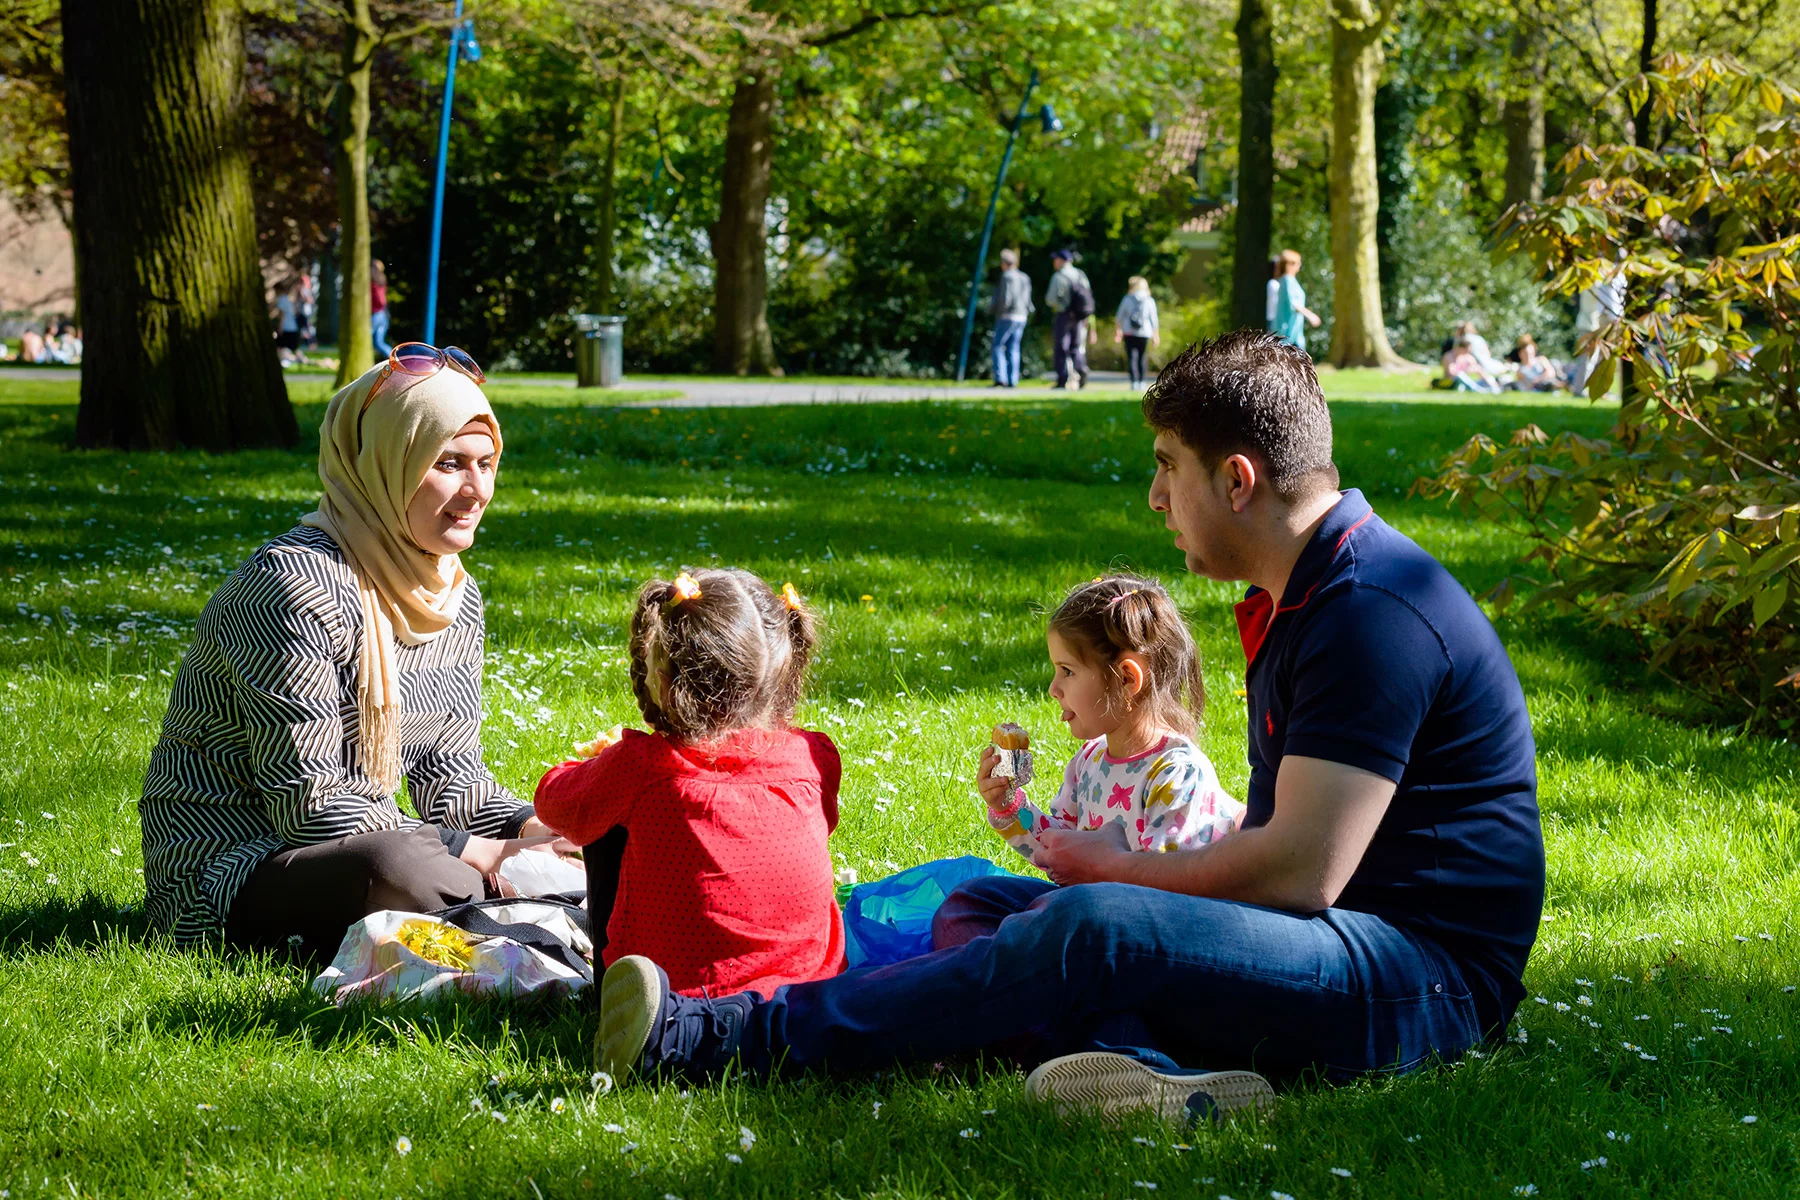 A family having a picnic in a park